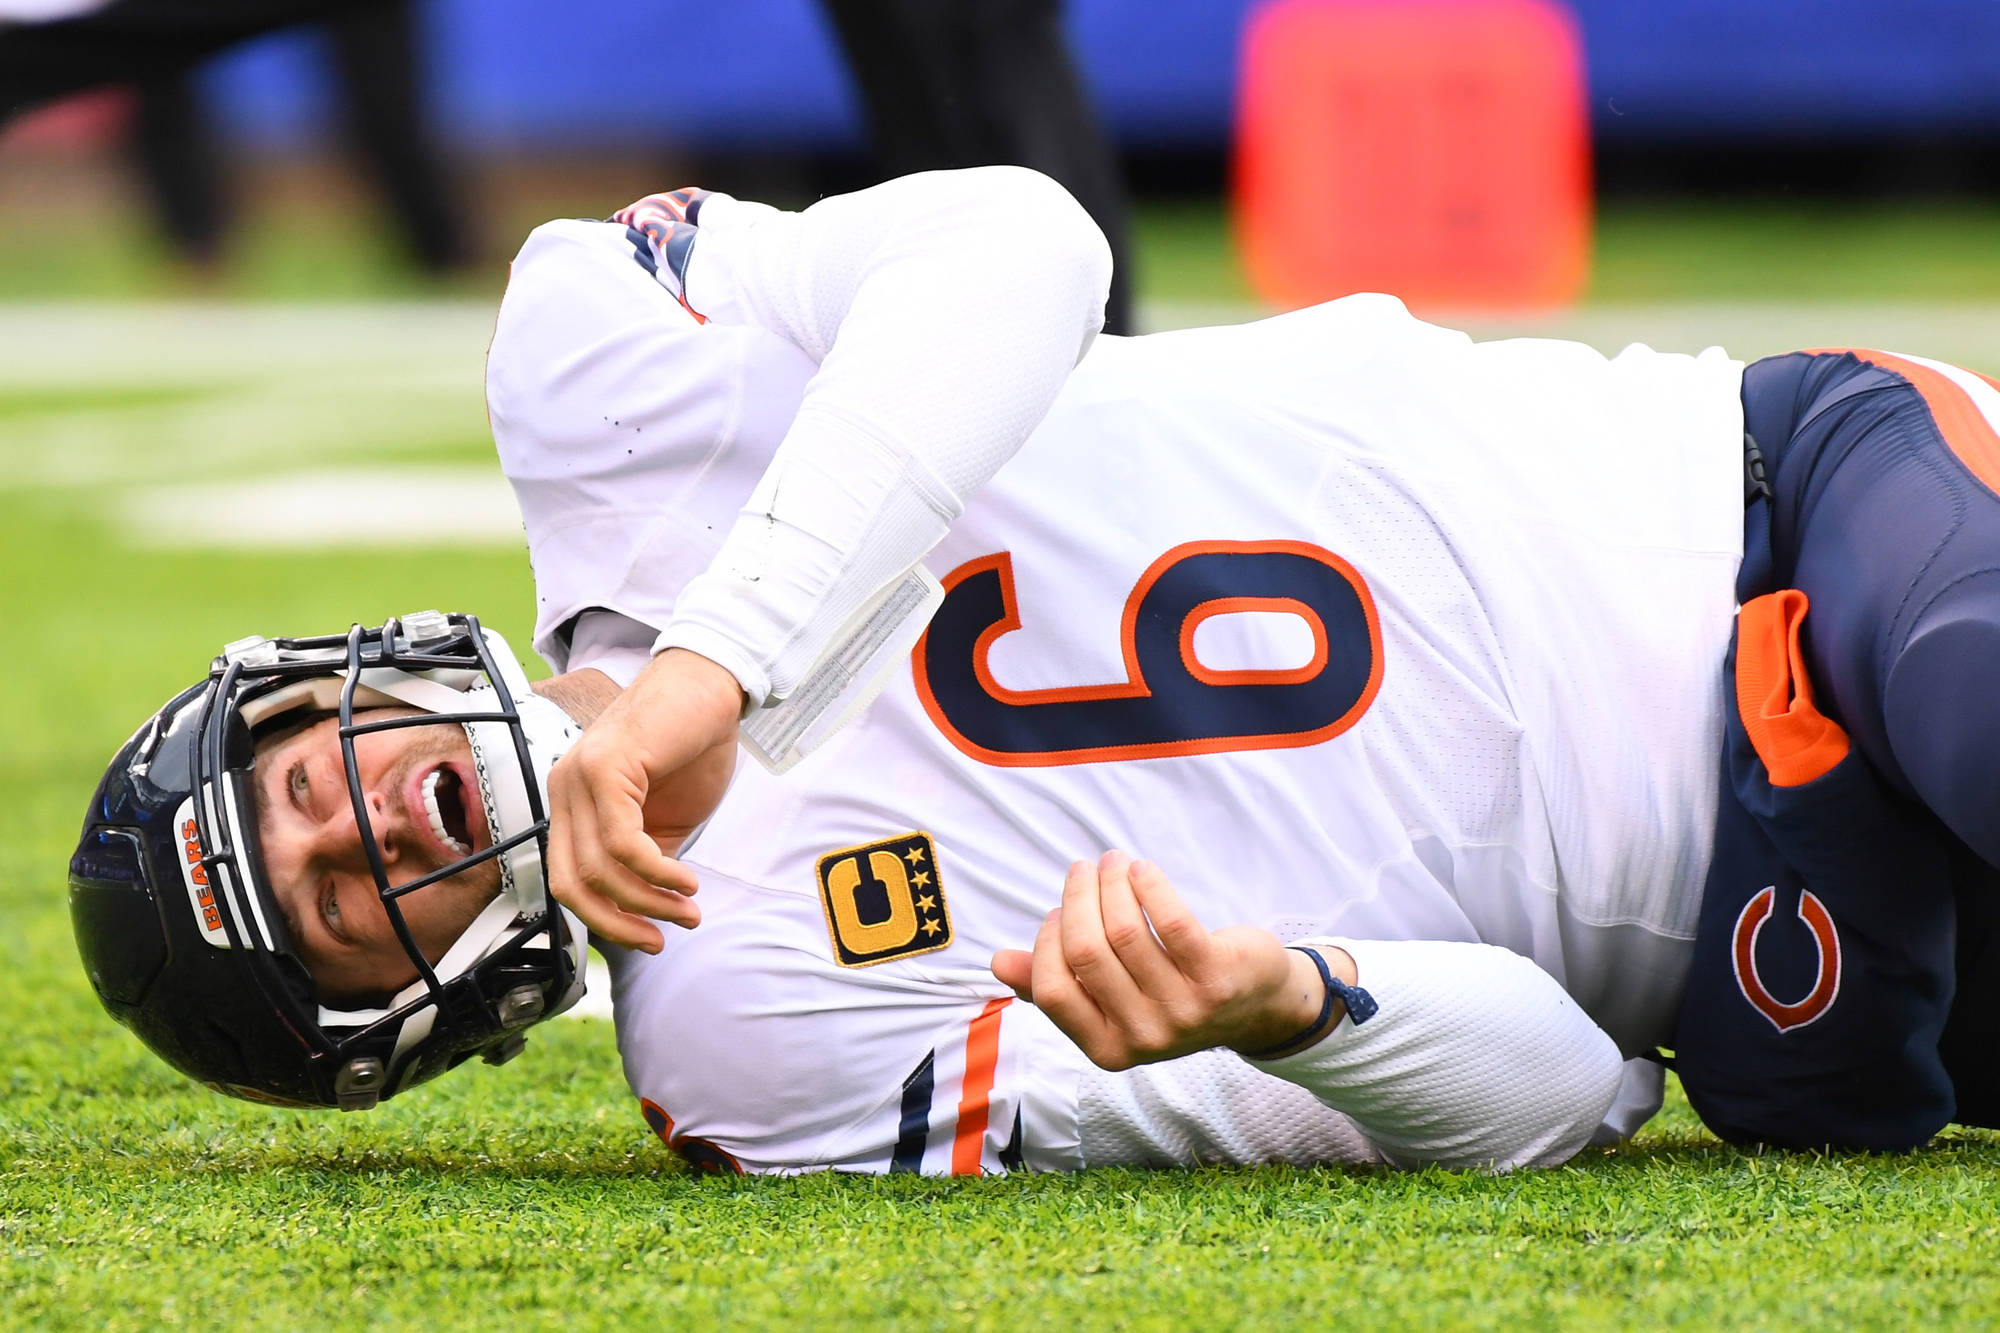 Jay Cutler Suffered A Shoulder Injury On Sunday, Could Be Out For Season